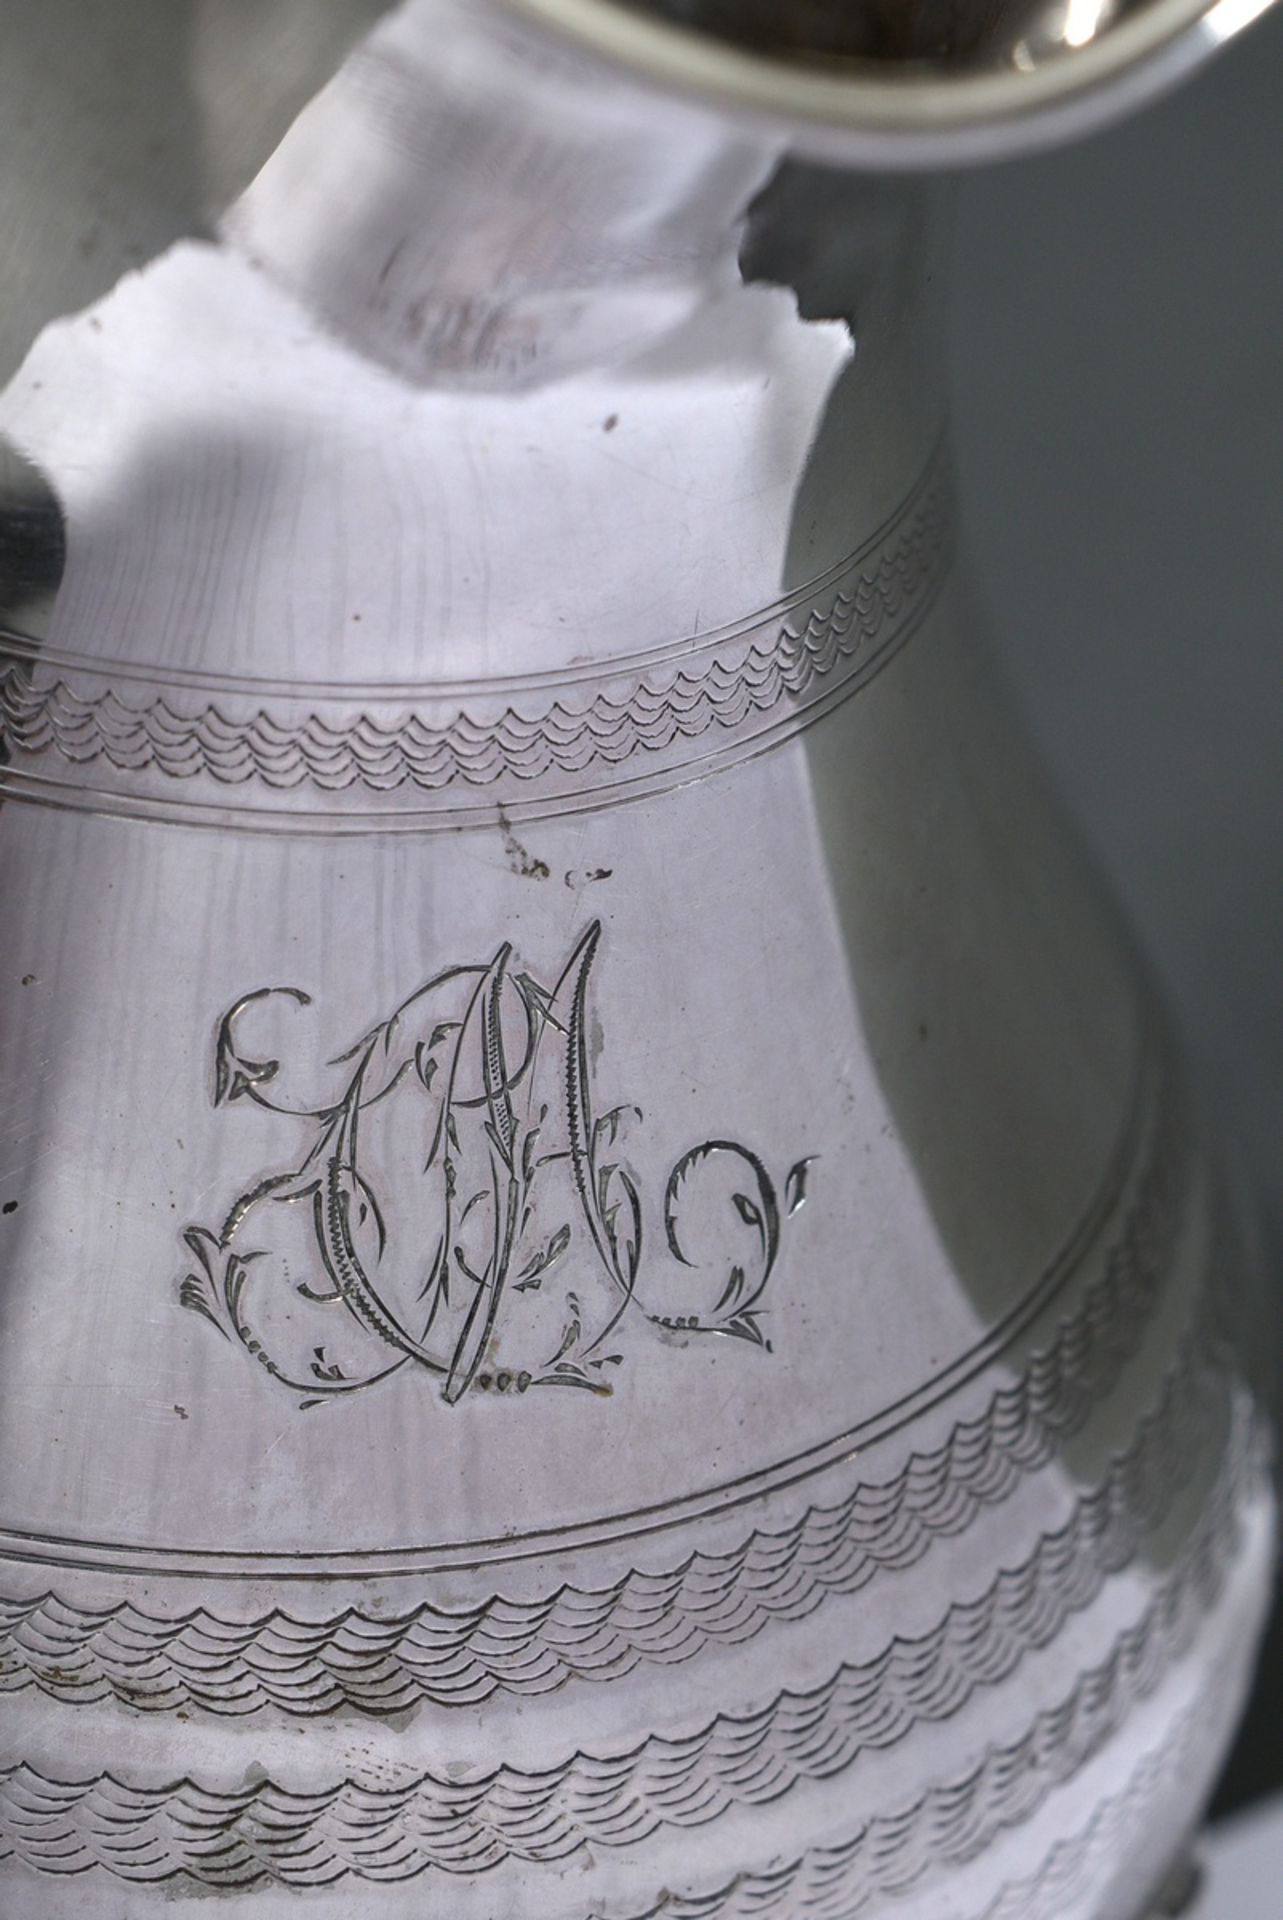 Cream jug on four shell feet with guilloché frieze, ligatured monogram engraving "CM" and curved ha - Image 3 of 5